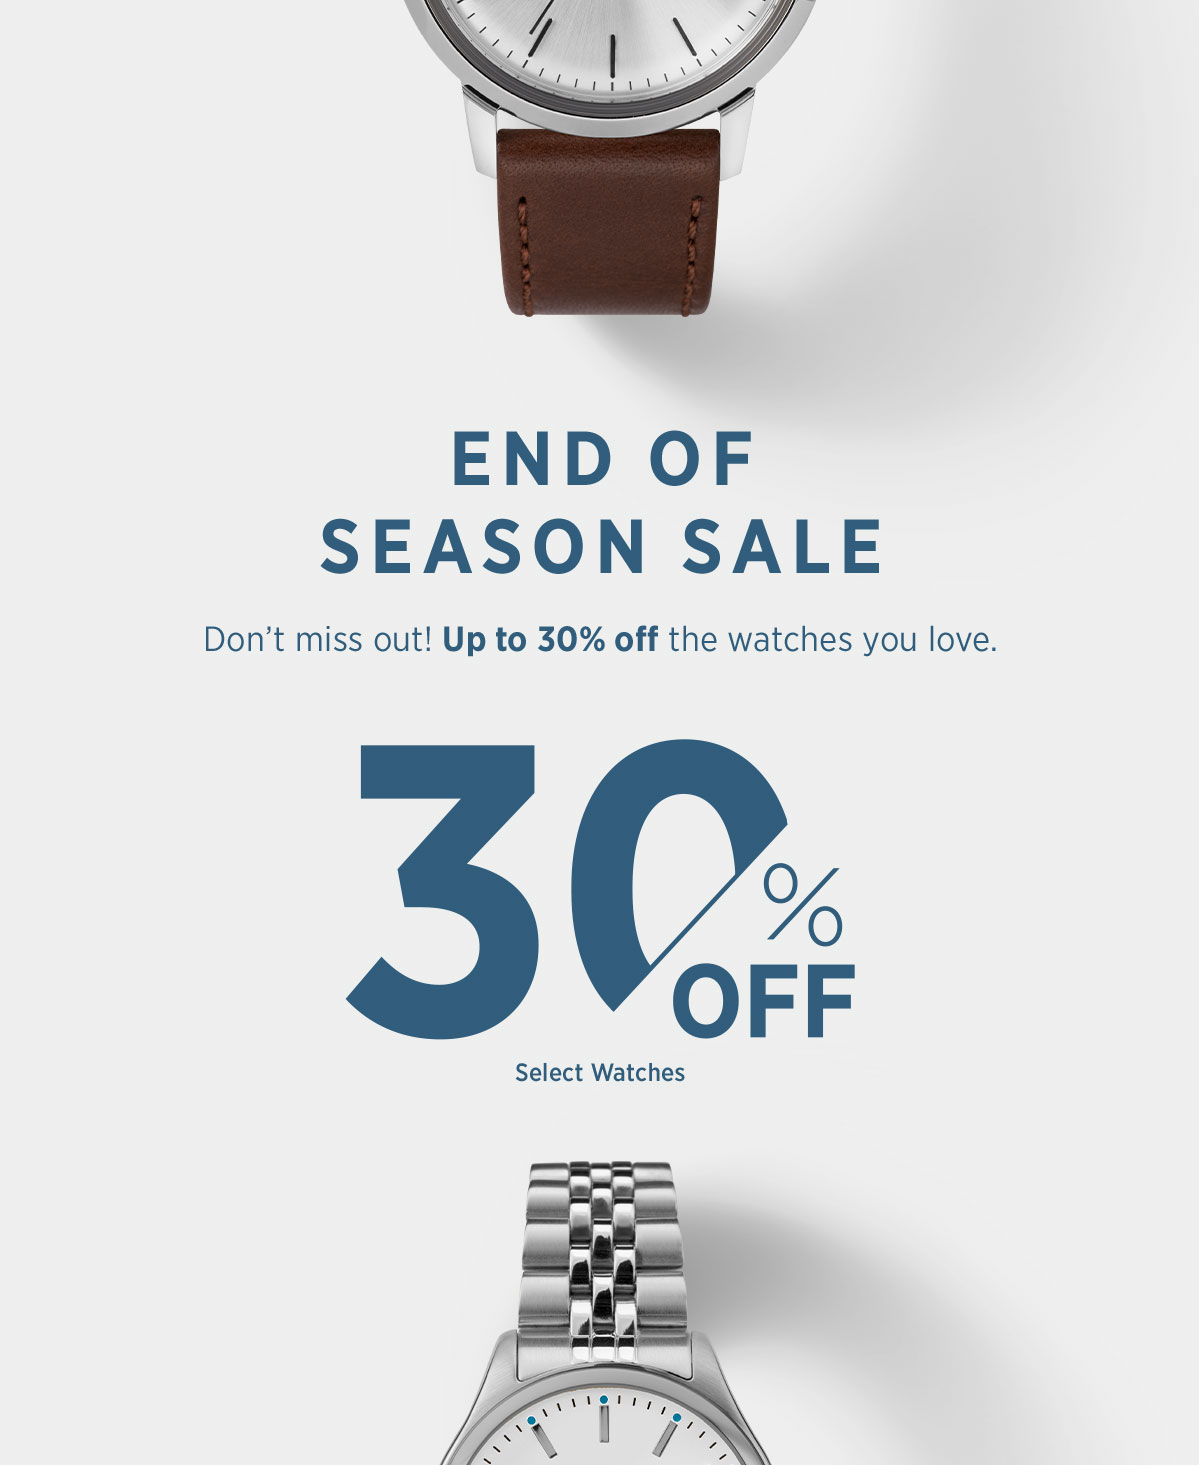 End of season sale - up to 30% off the watches you love. 30% Off select watches